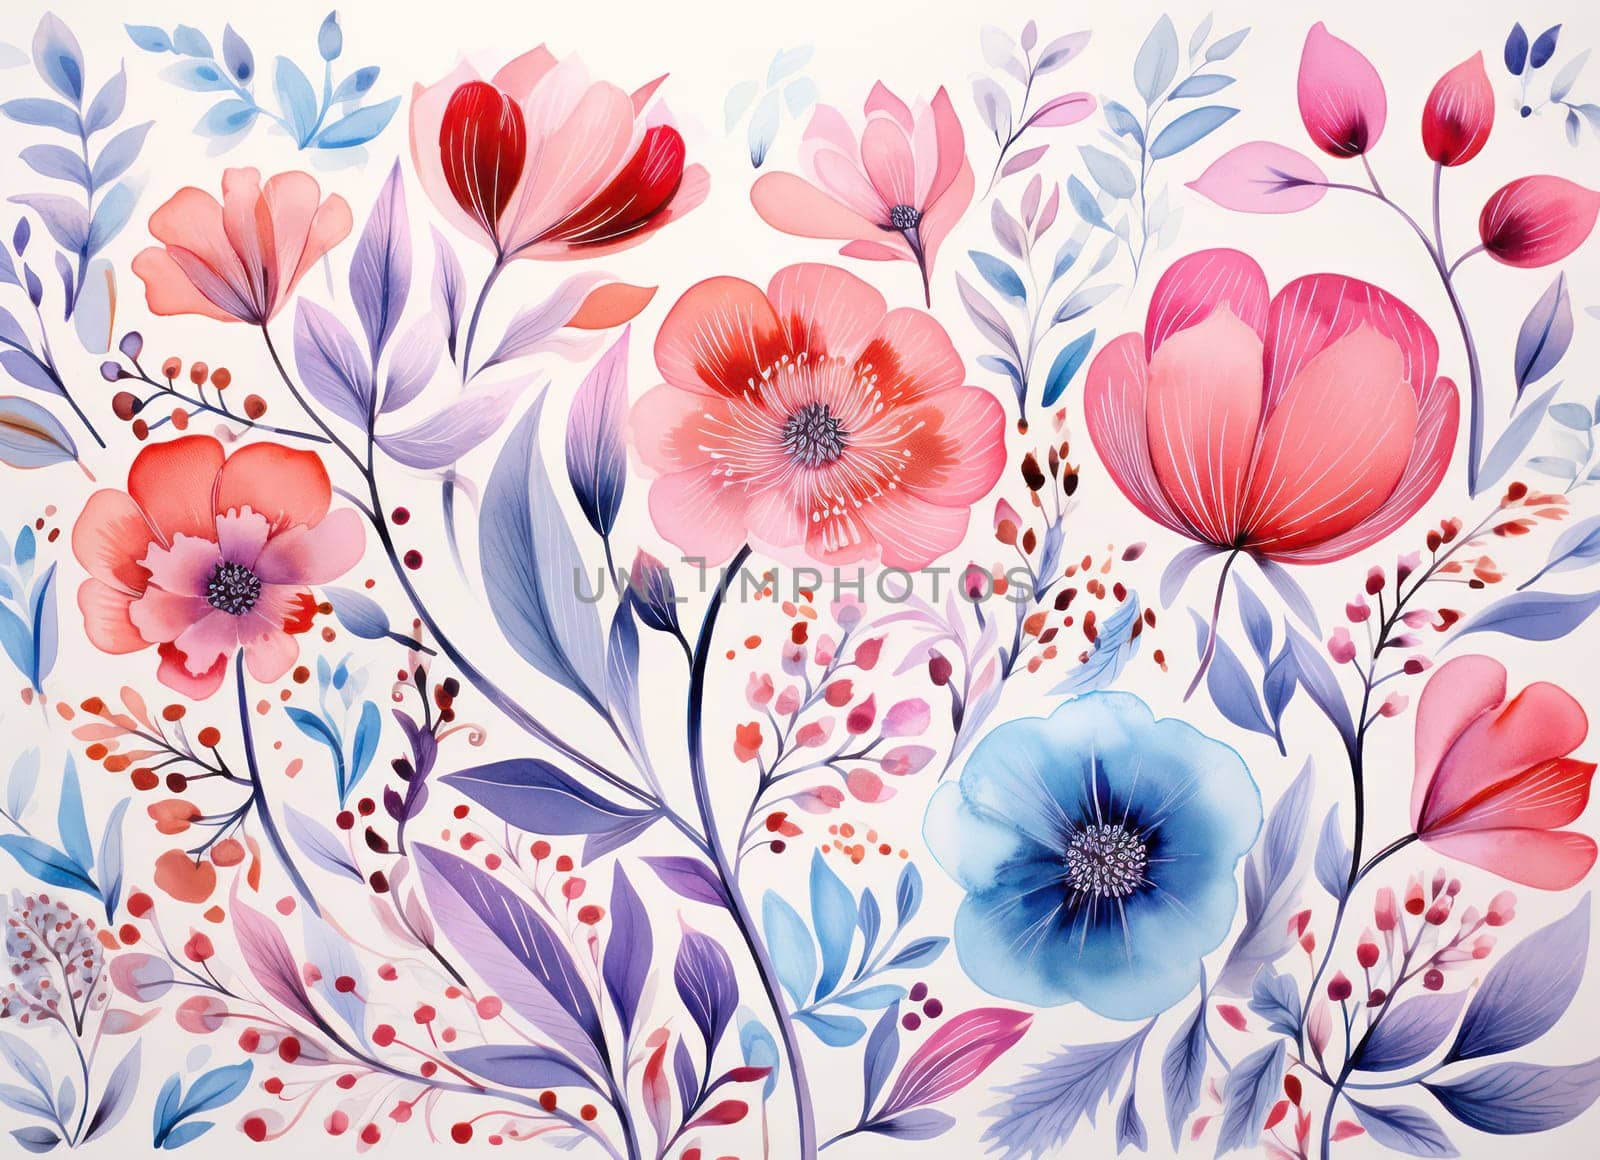 Floral Spring Summer: A Blissful Blossom Bouquet on a Watercolor Garden Background by Vichizh